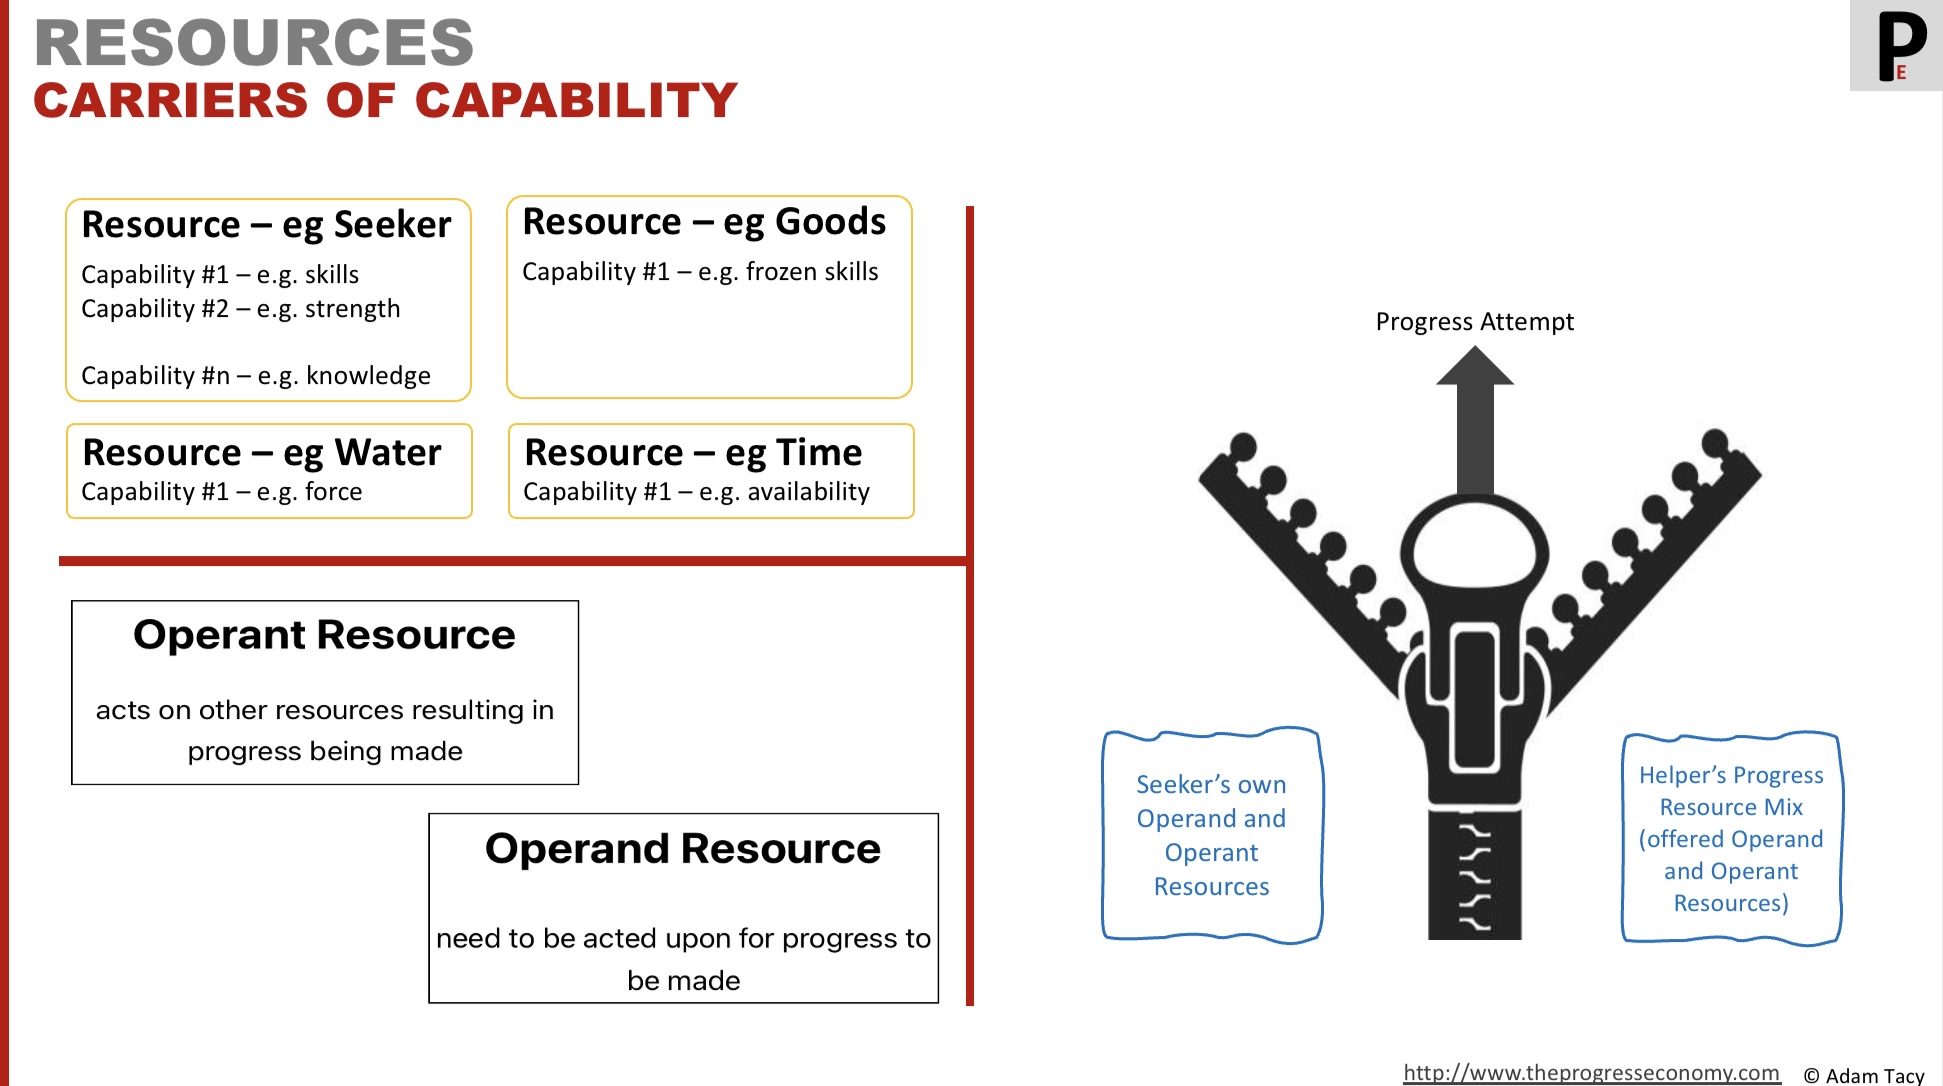 Resources – carriers of capabilities